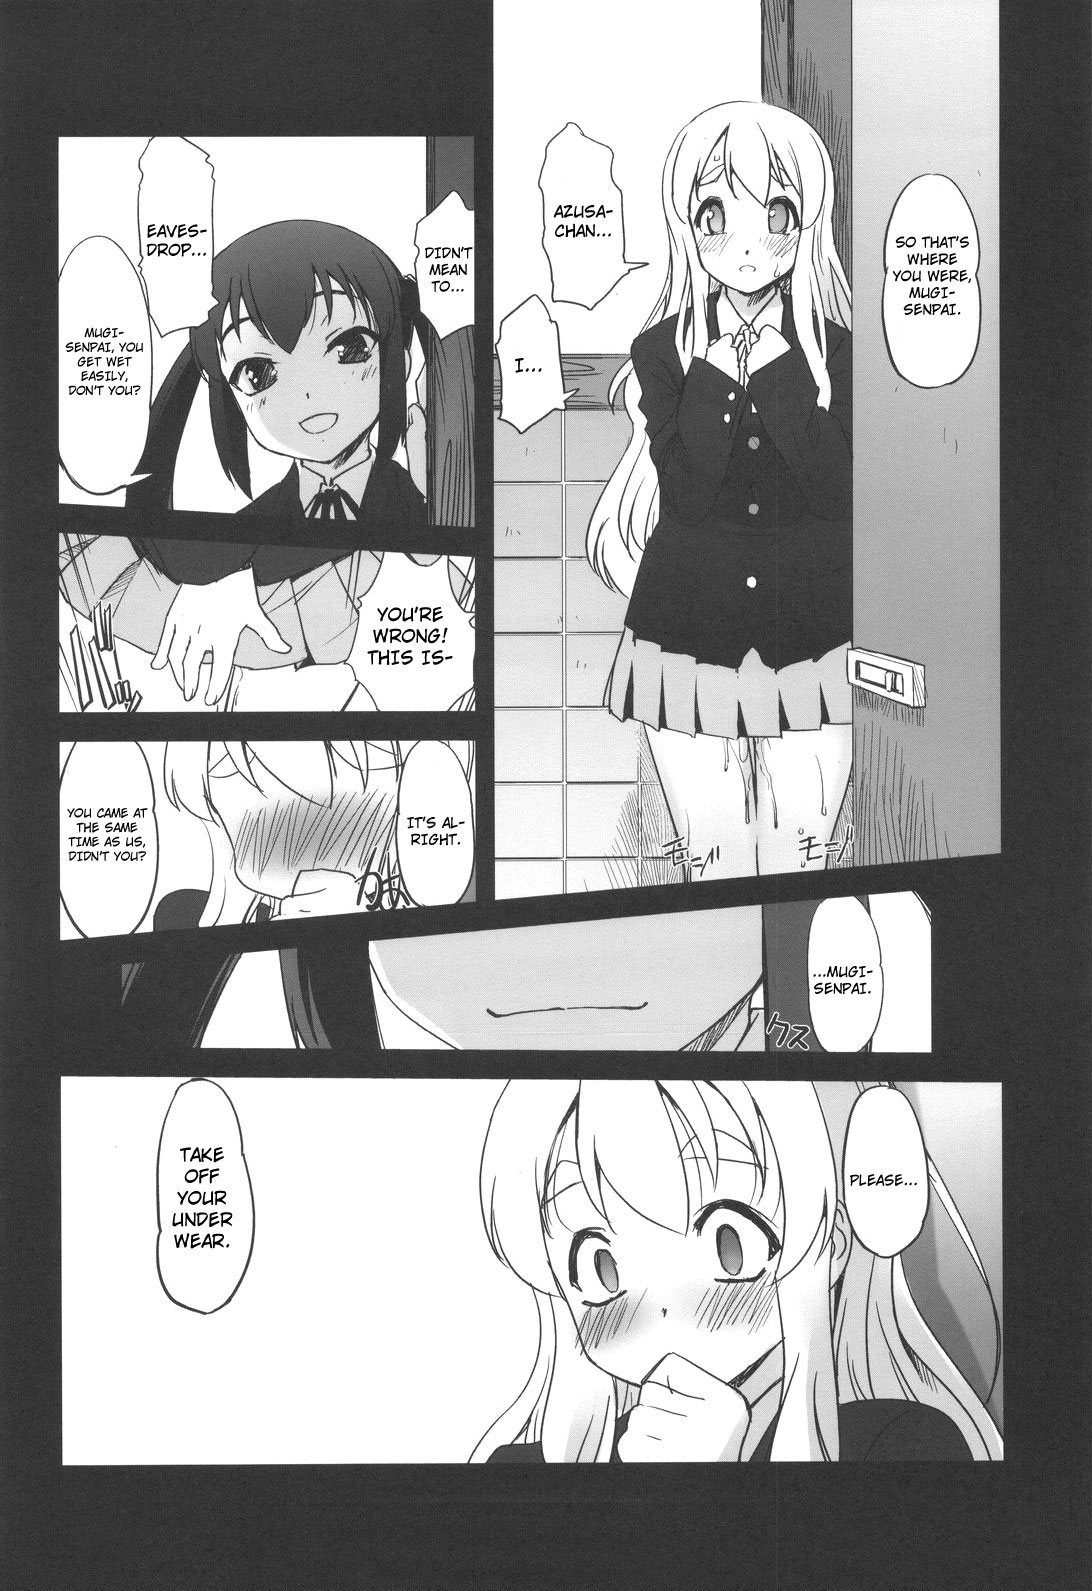 (C76) [G-Power! (Sasayuki)] Cat Ears And A Restroom And The Club Room After School (K-ON) [ENG] (C76) [G-Power! (SASAYUKi)] ネコミミとトイレと放課後の部室 (けいおん!) [英訳]